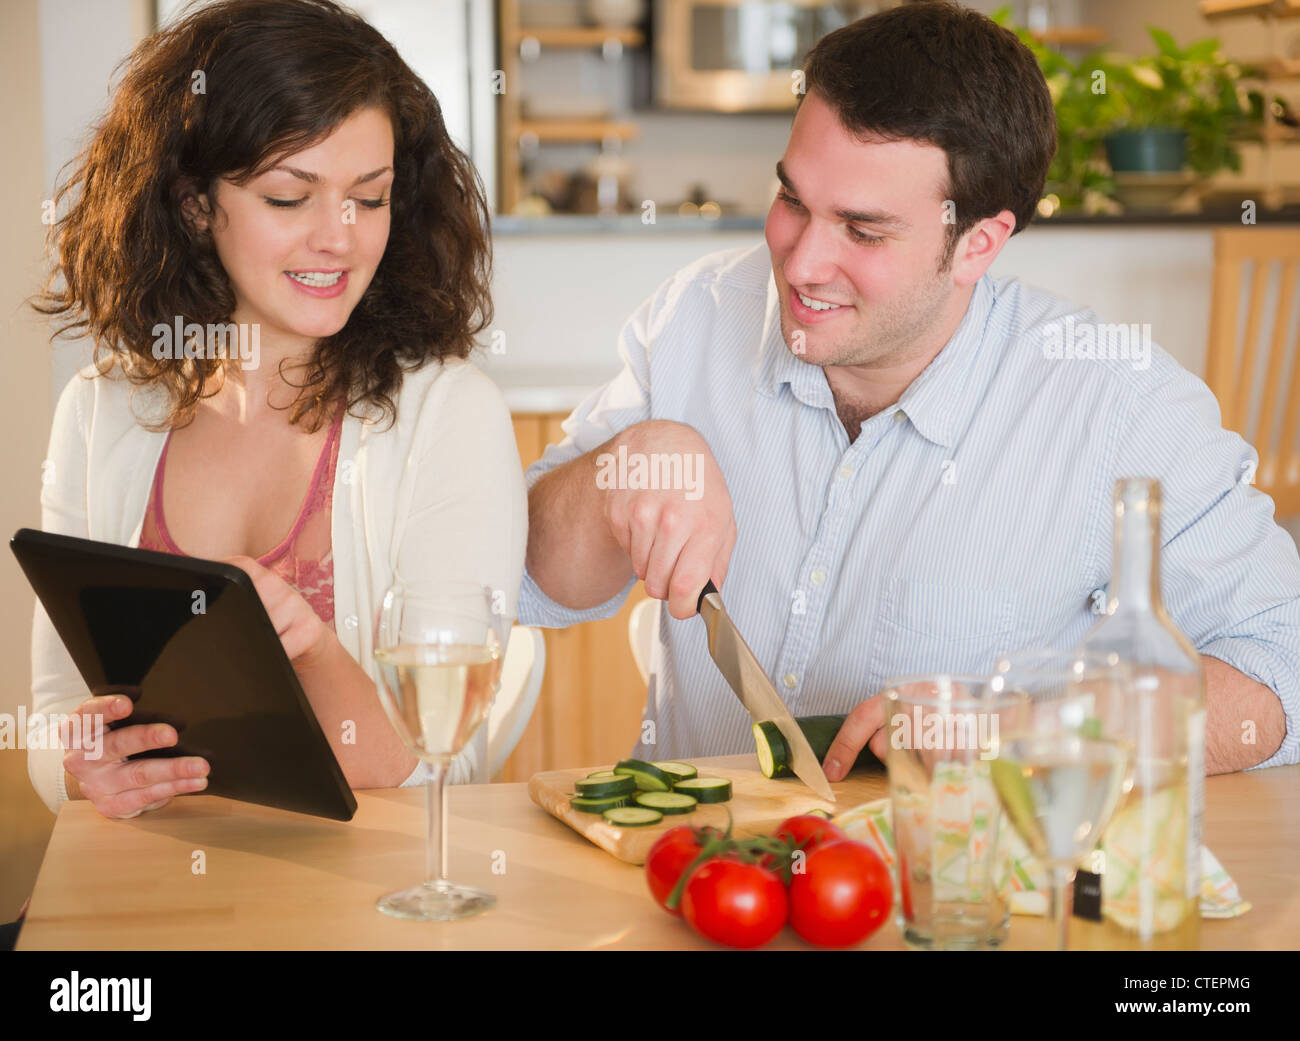 USA, New Jersey, Jersey City, Couple preparing meal and using digital tablet Banque D'Images